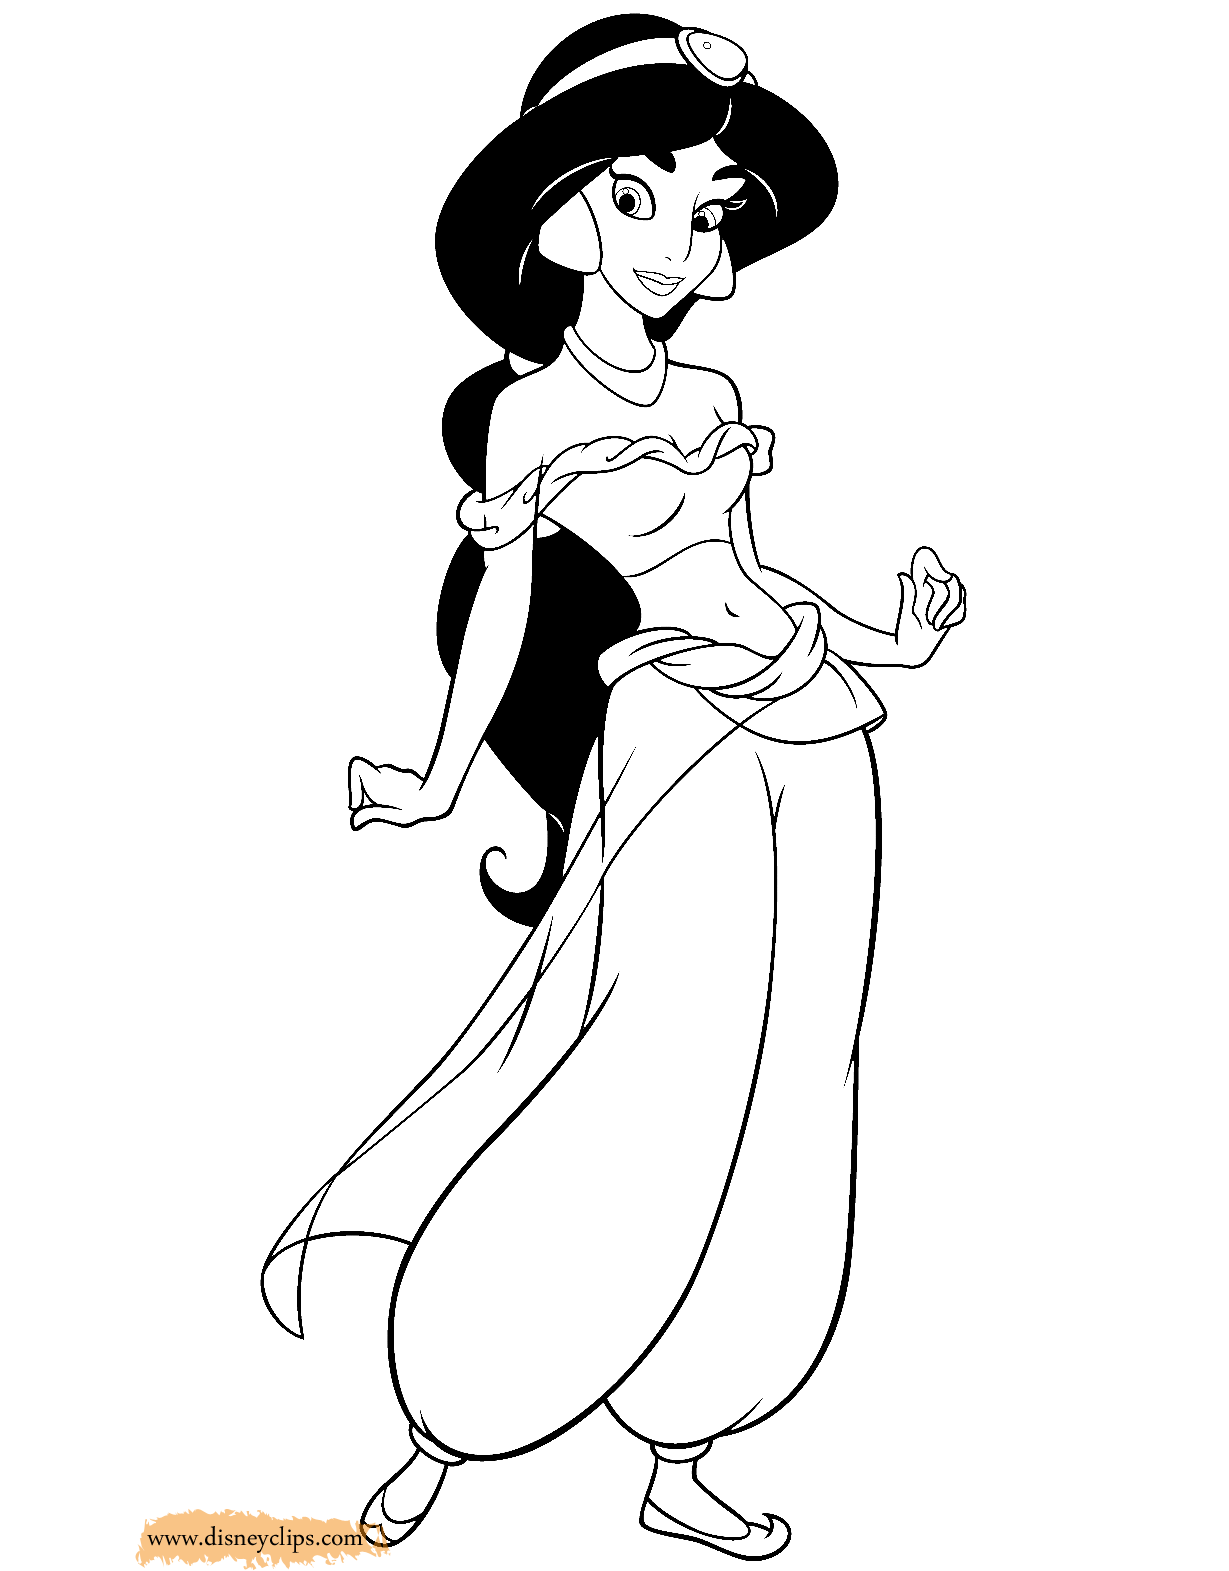 Jasmin - Free Colouring Pages